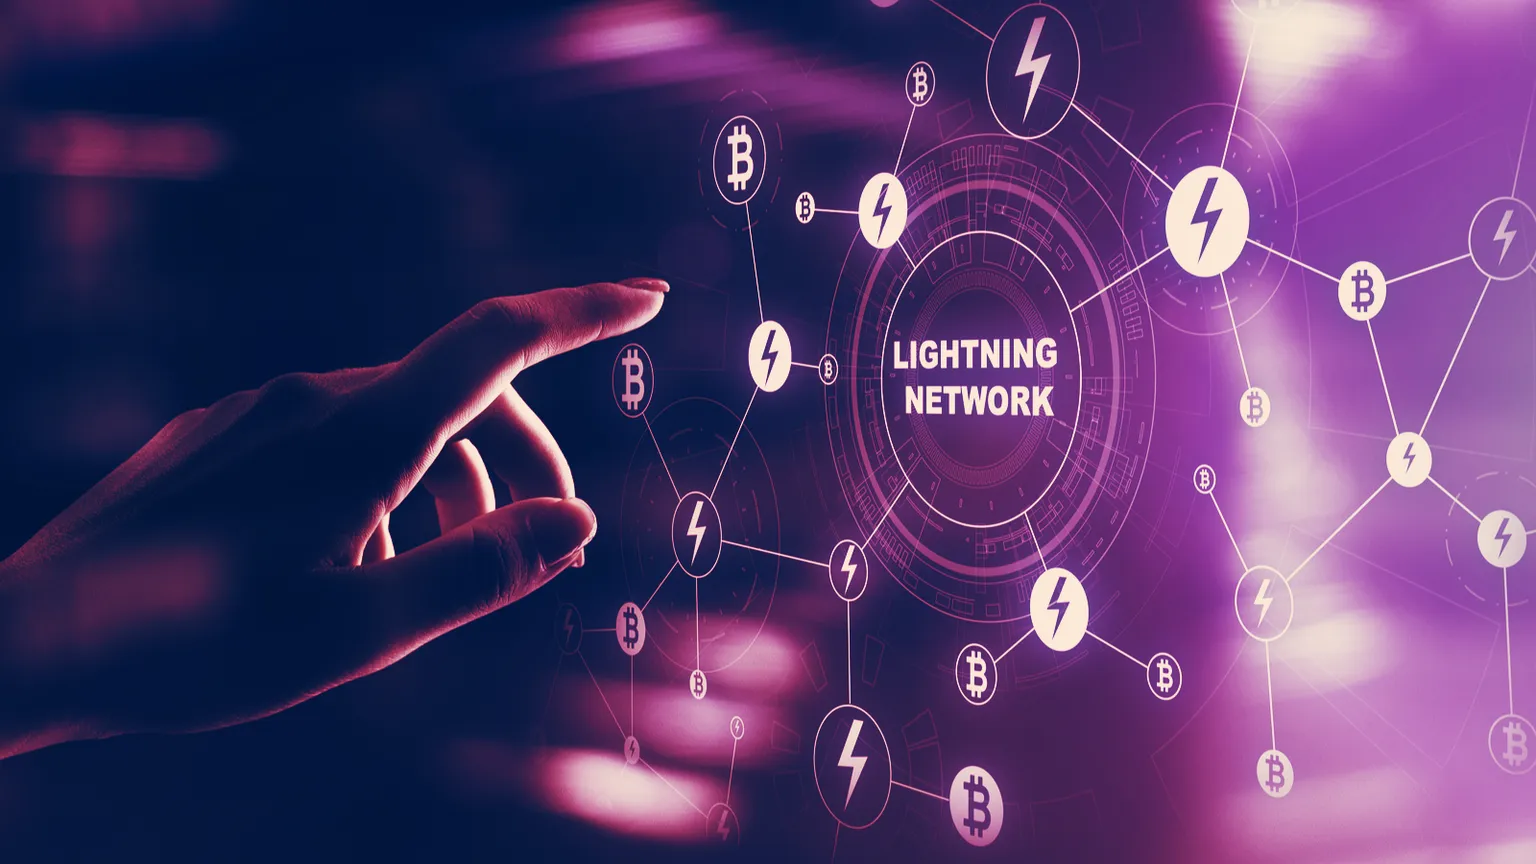 The Lightning Network is a “second-layer solution” built on top of the Bitcoin network that allows for faster payments (Image: Shutterstock)